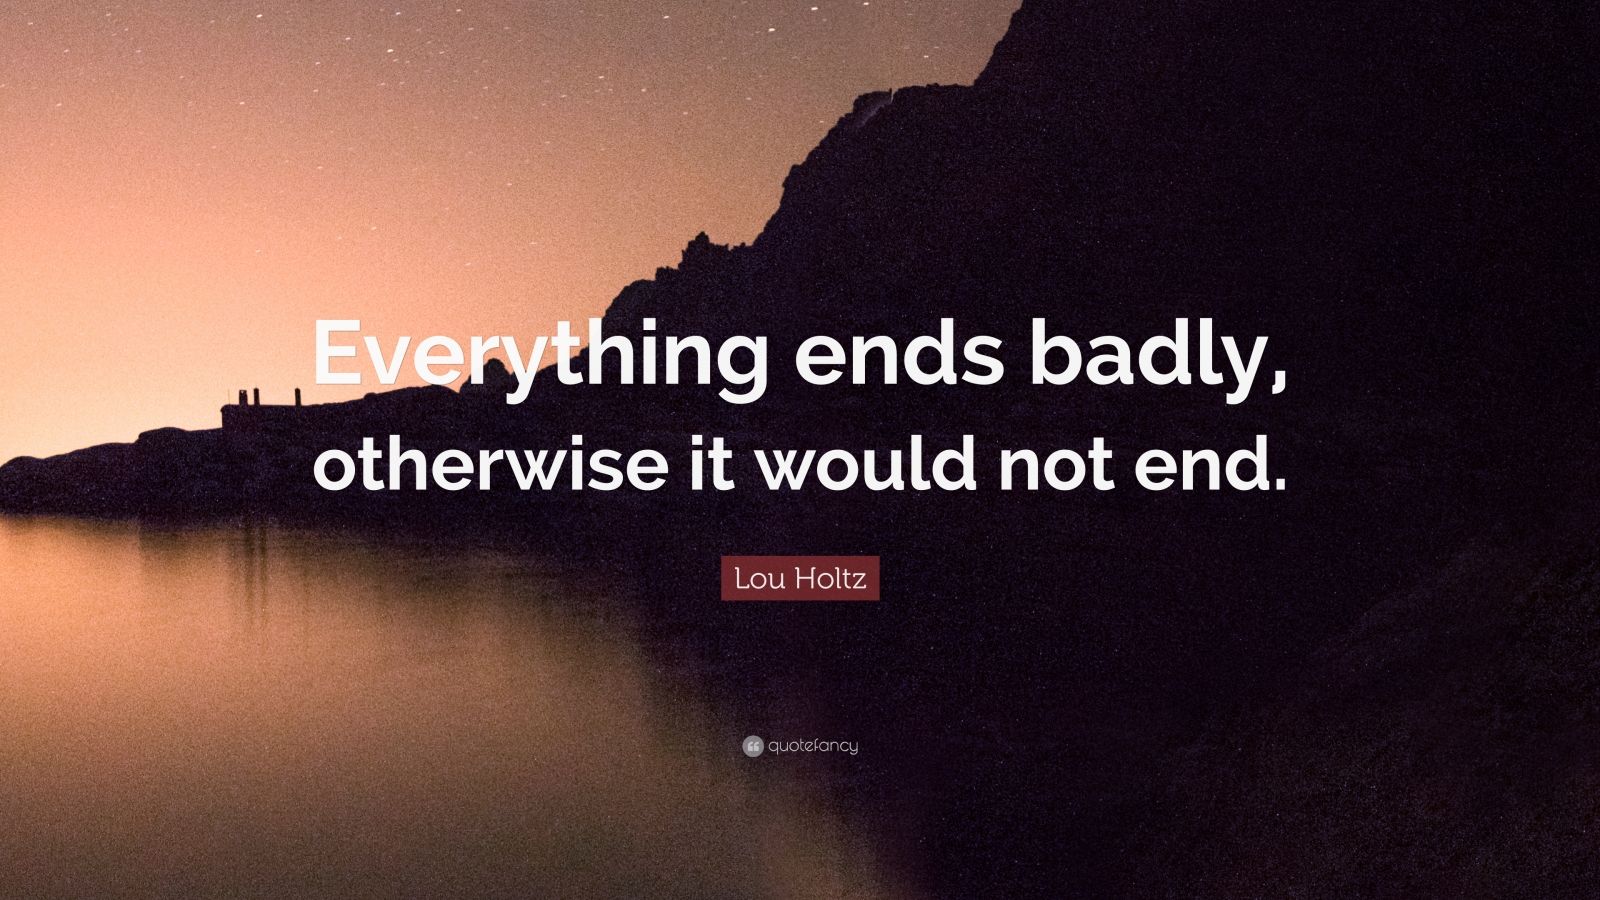 Lou Holtz Quote: “Everything ends badly, otherwise it would not end ...